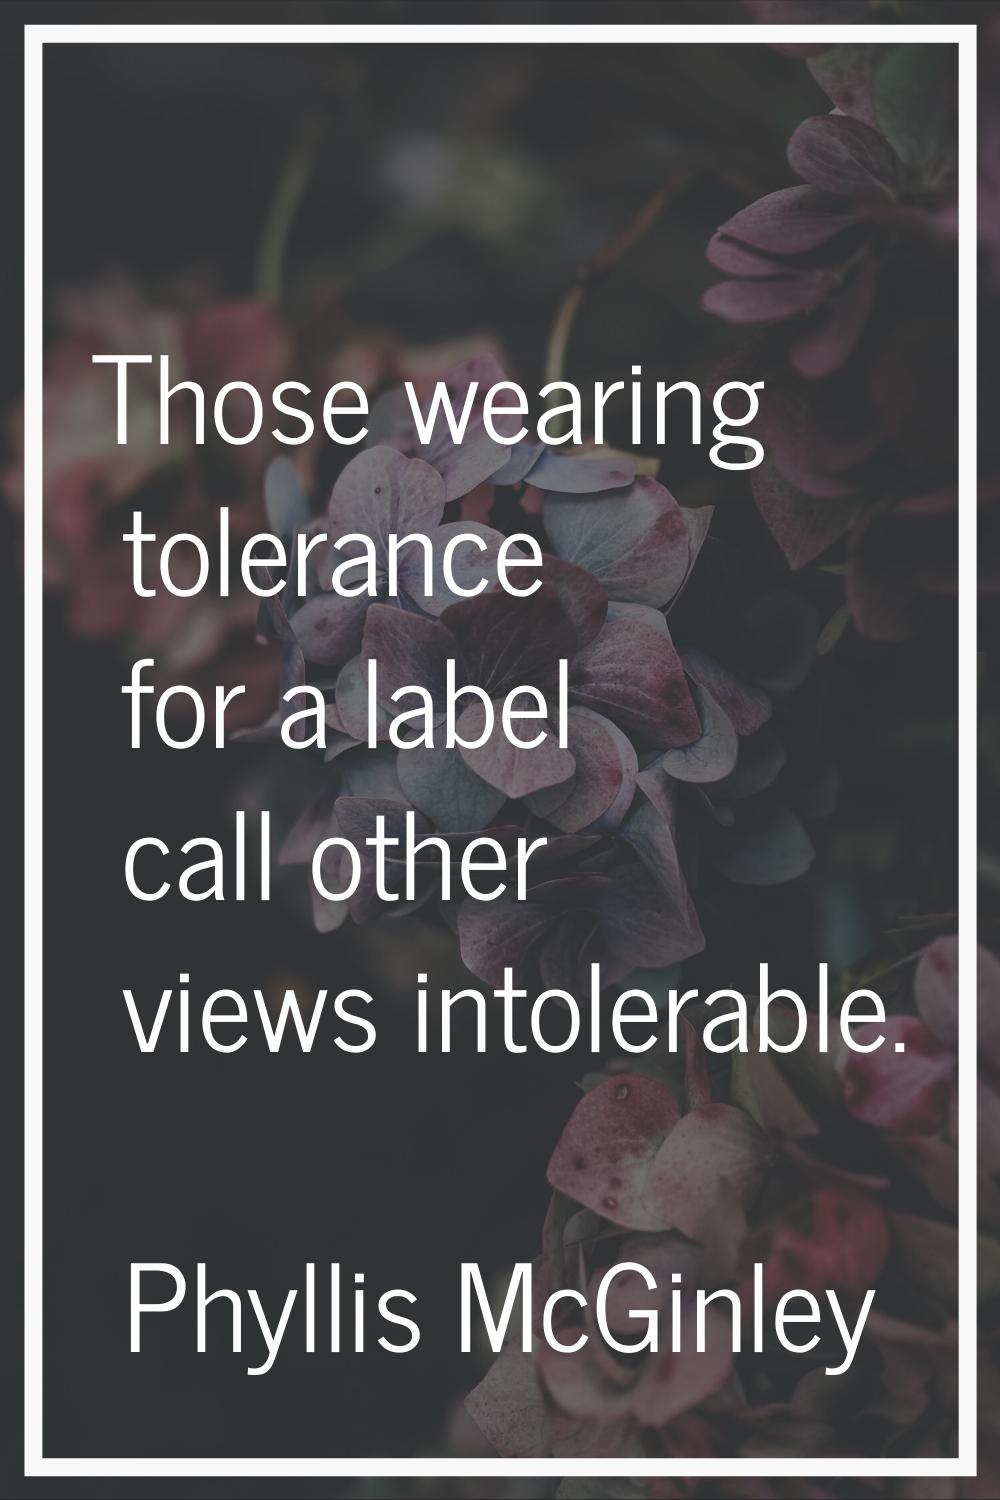 Those wearing tolerance for a label call other views intolerable.